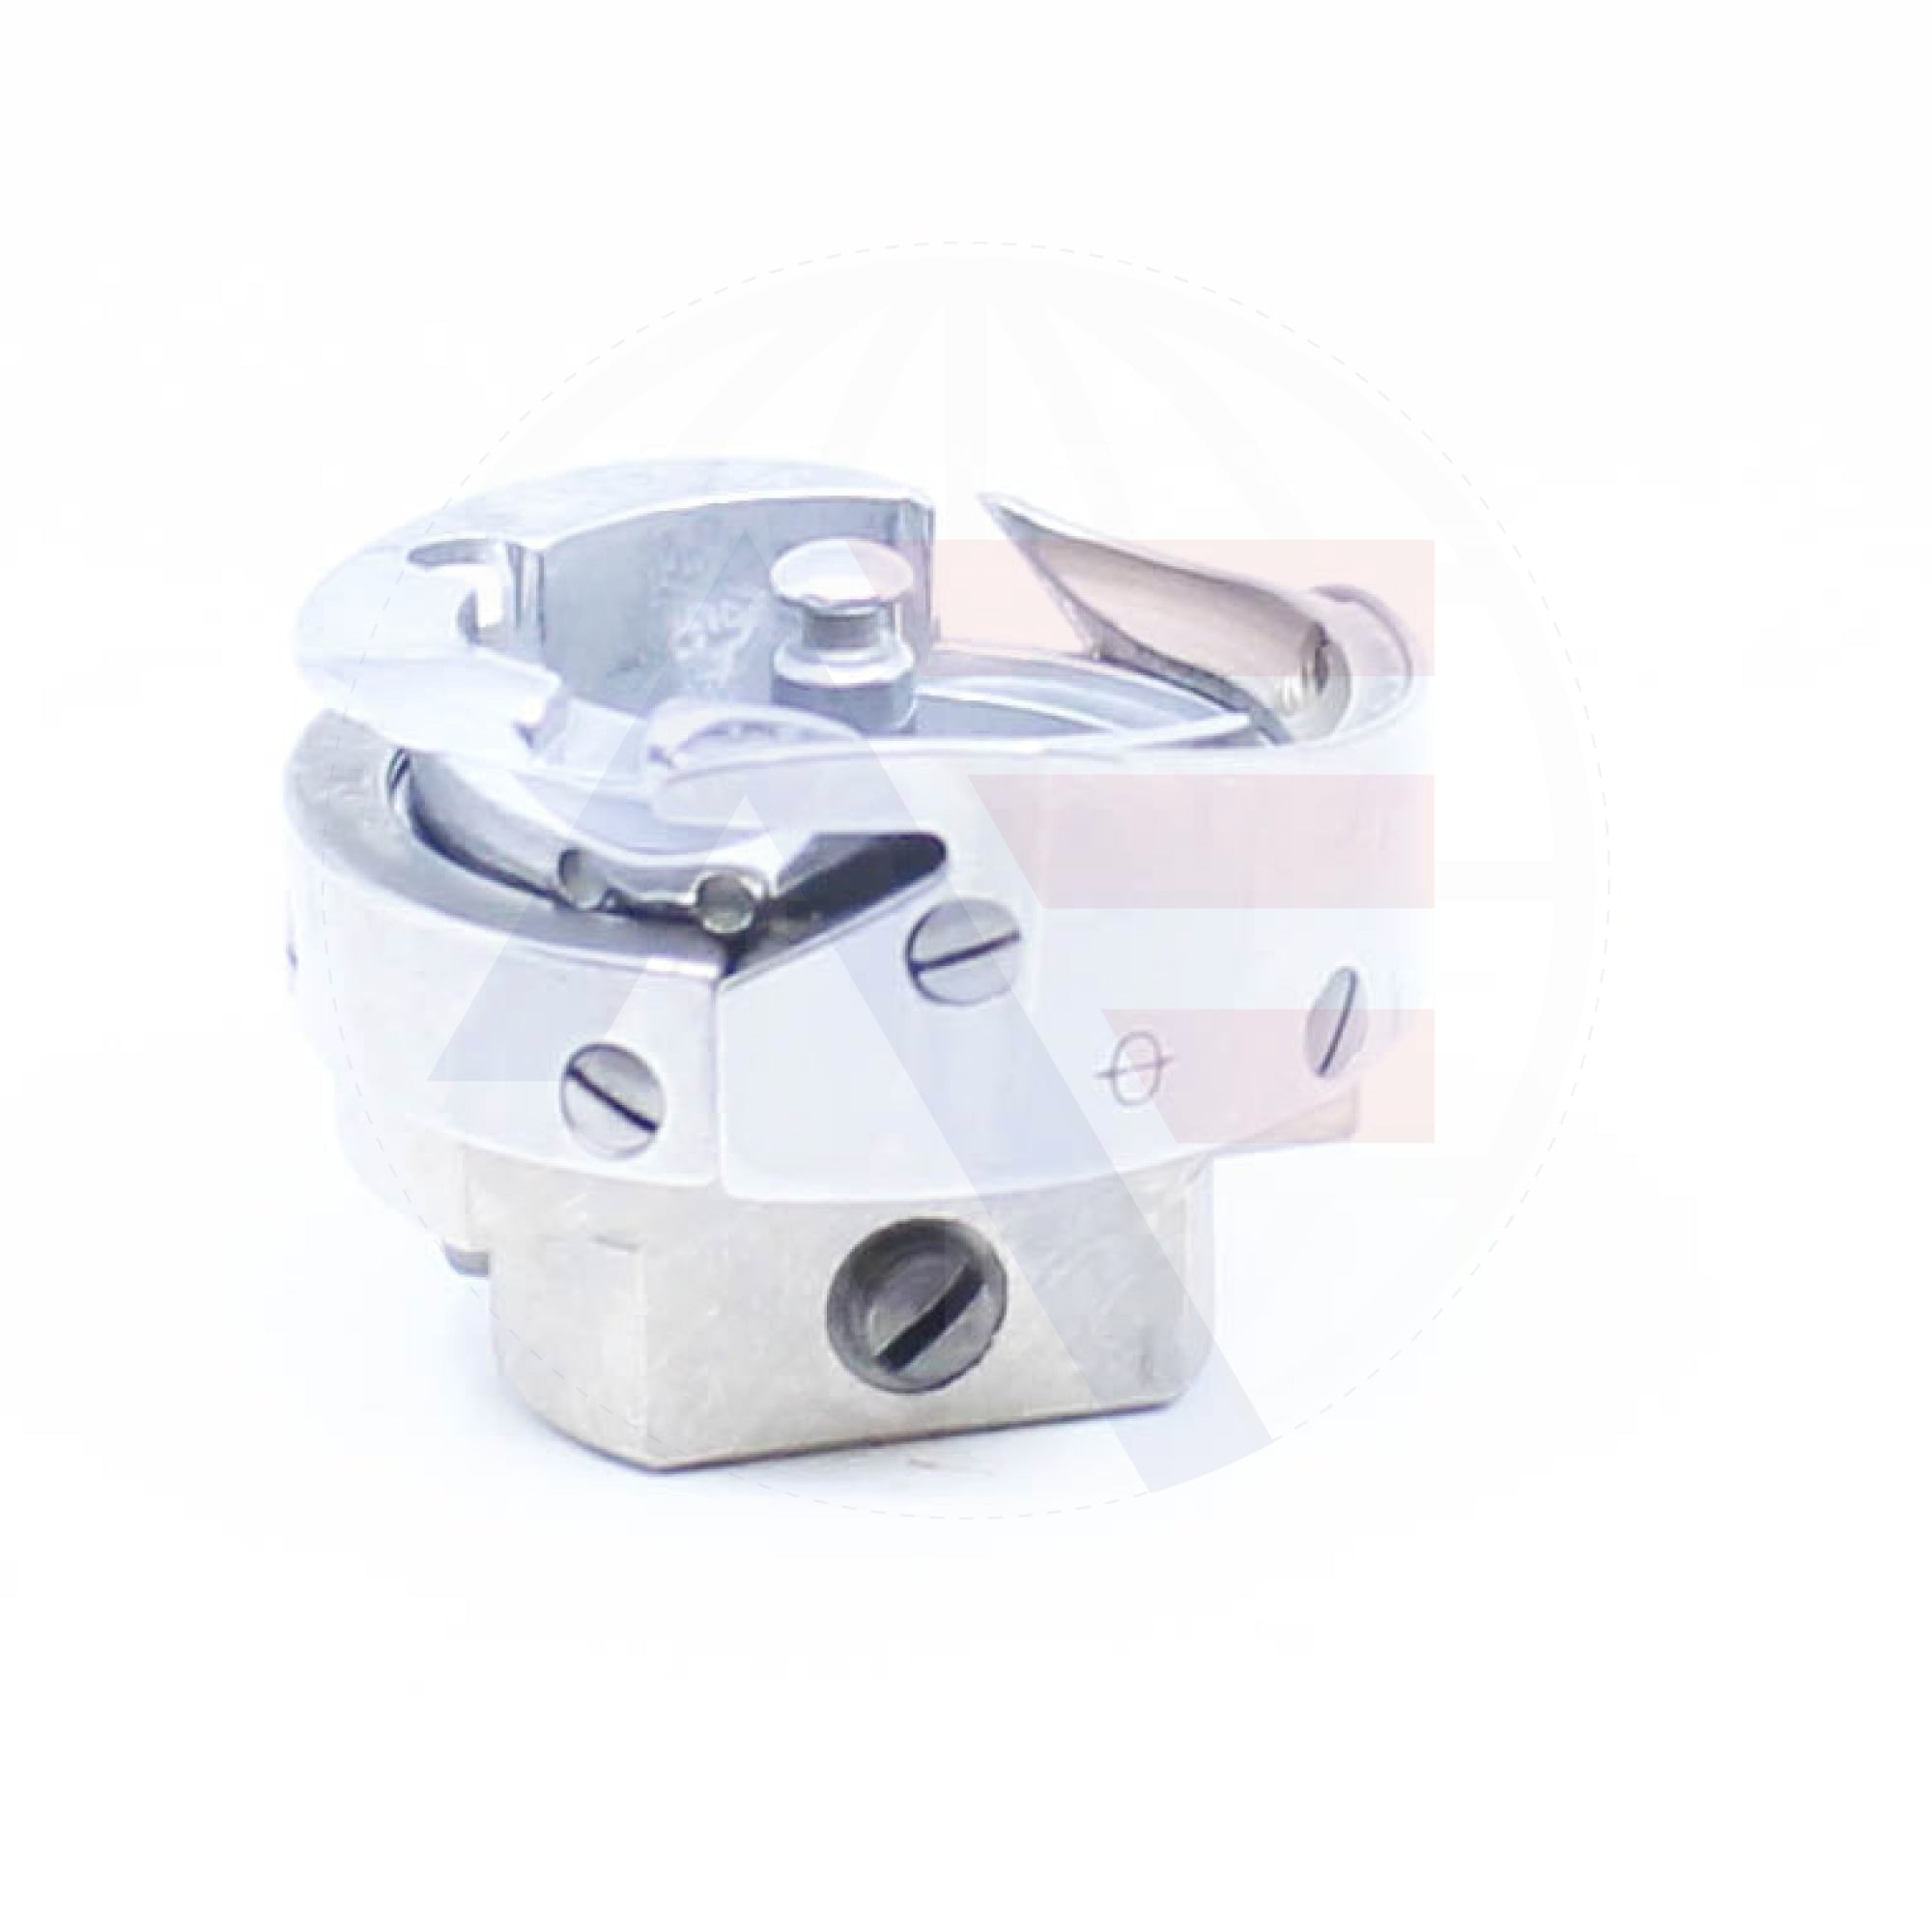 Hsh794C Hook And Base Sewing Machine Spare Parts